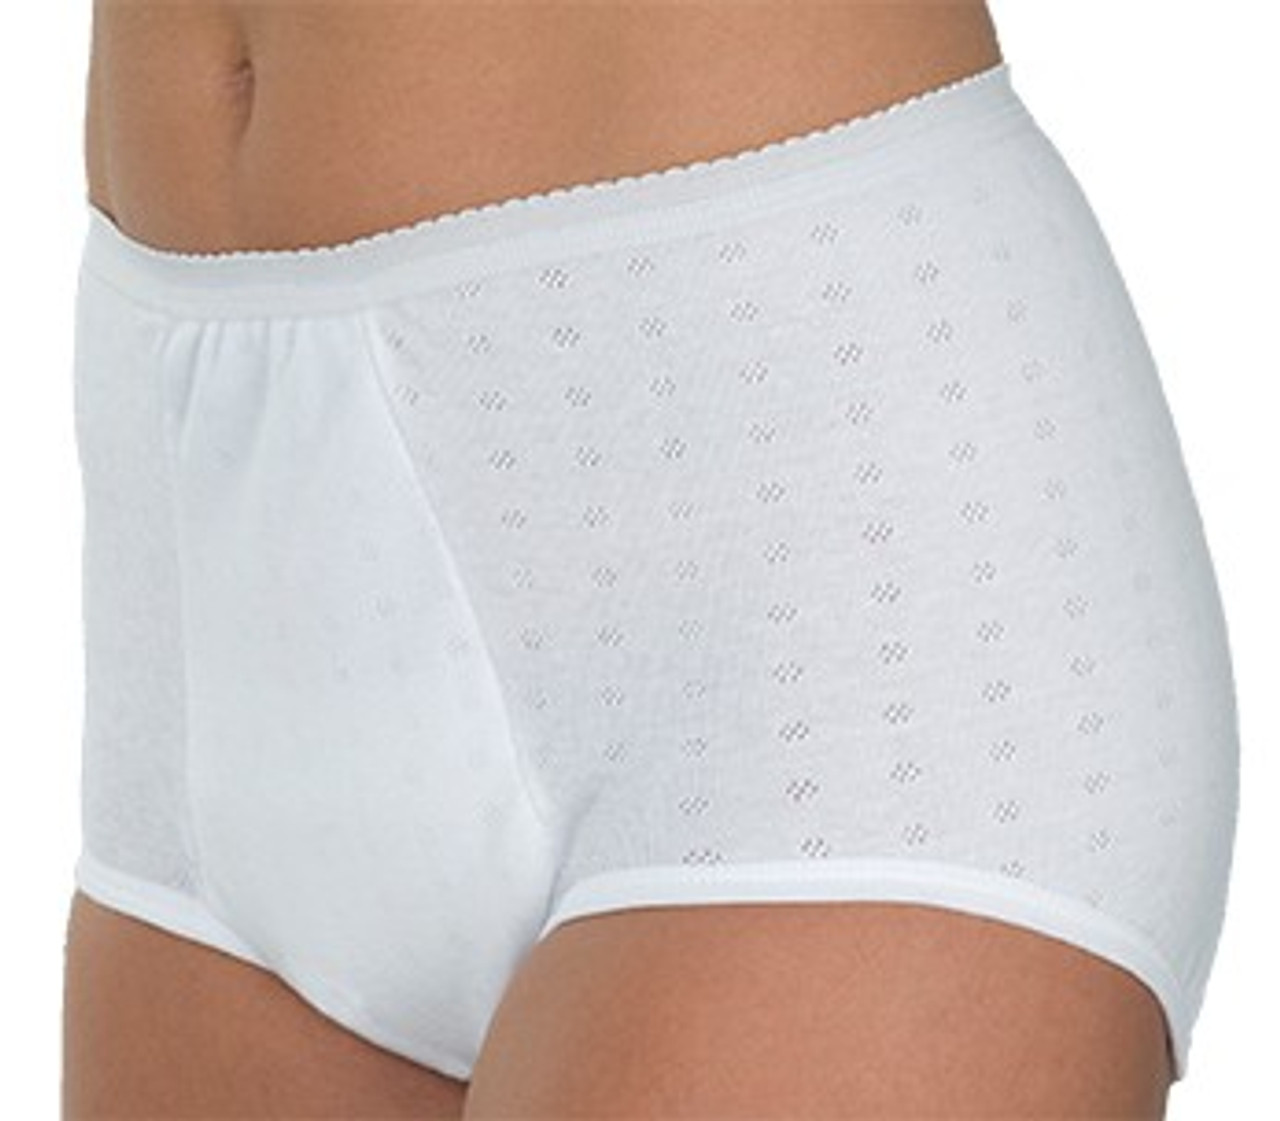 Wearever HDL100-WHITE-5XL-3PK Women's Super Incontinence Panties Washable Reusable Bladder Control Briefs (Pack of 3)